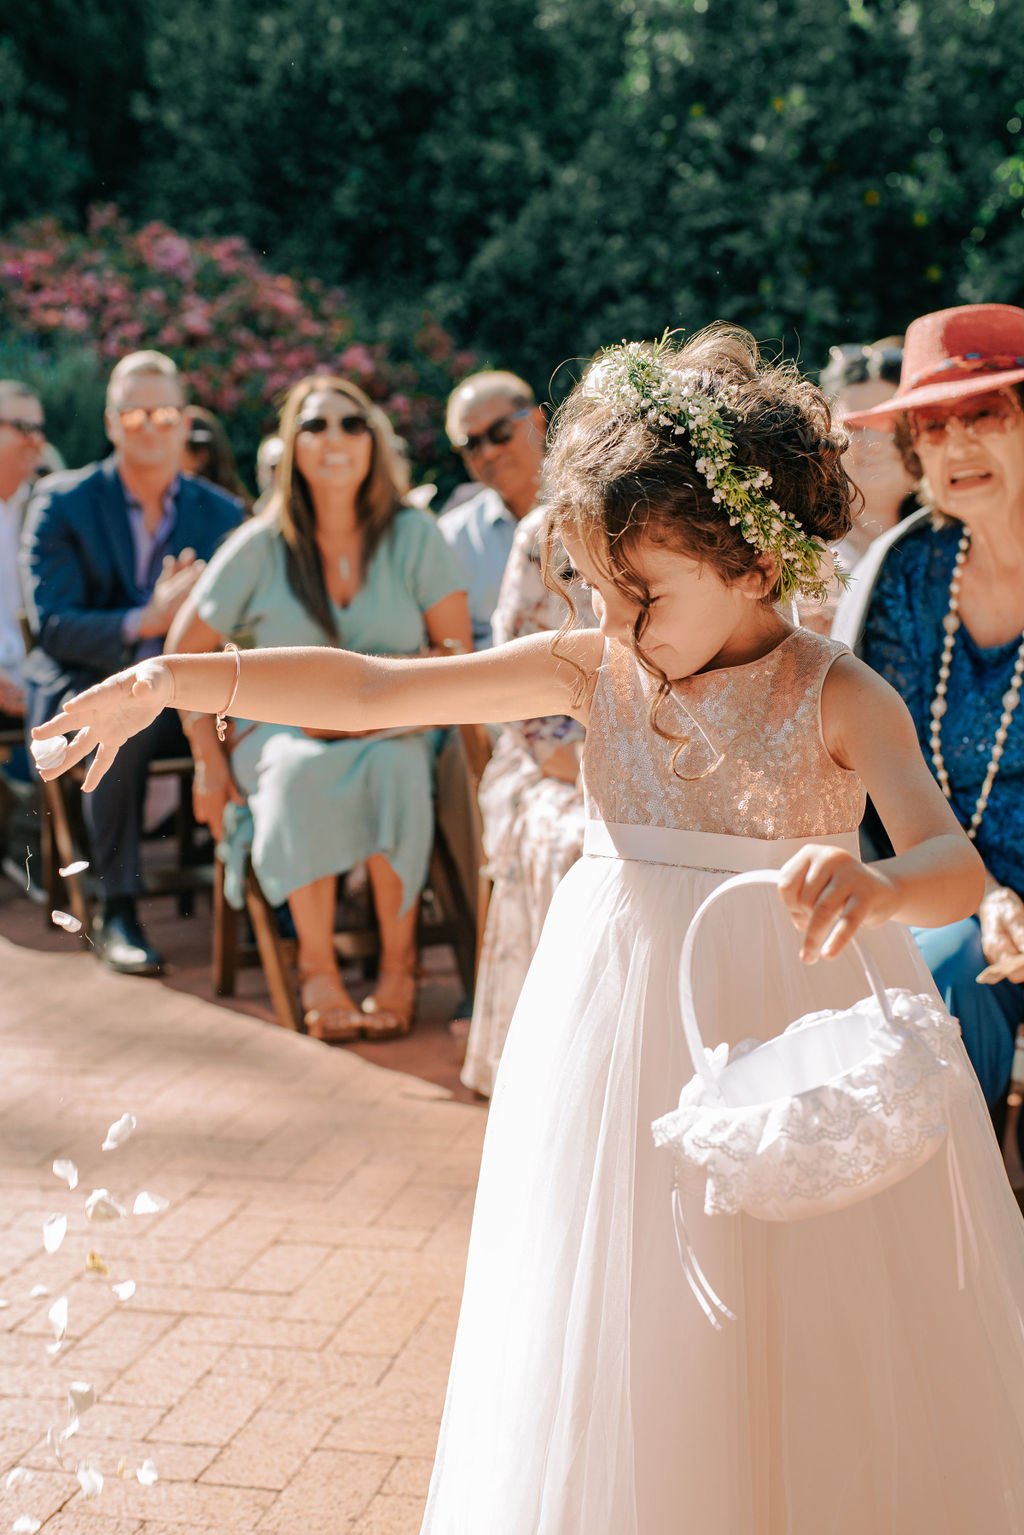 www.santabarbarawedding.com | Events by Fran | Quail Ranch | Scott Andrew Co. | Friar Tux | Flower Girl Dropping Petals at Ceremony